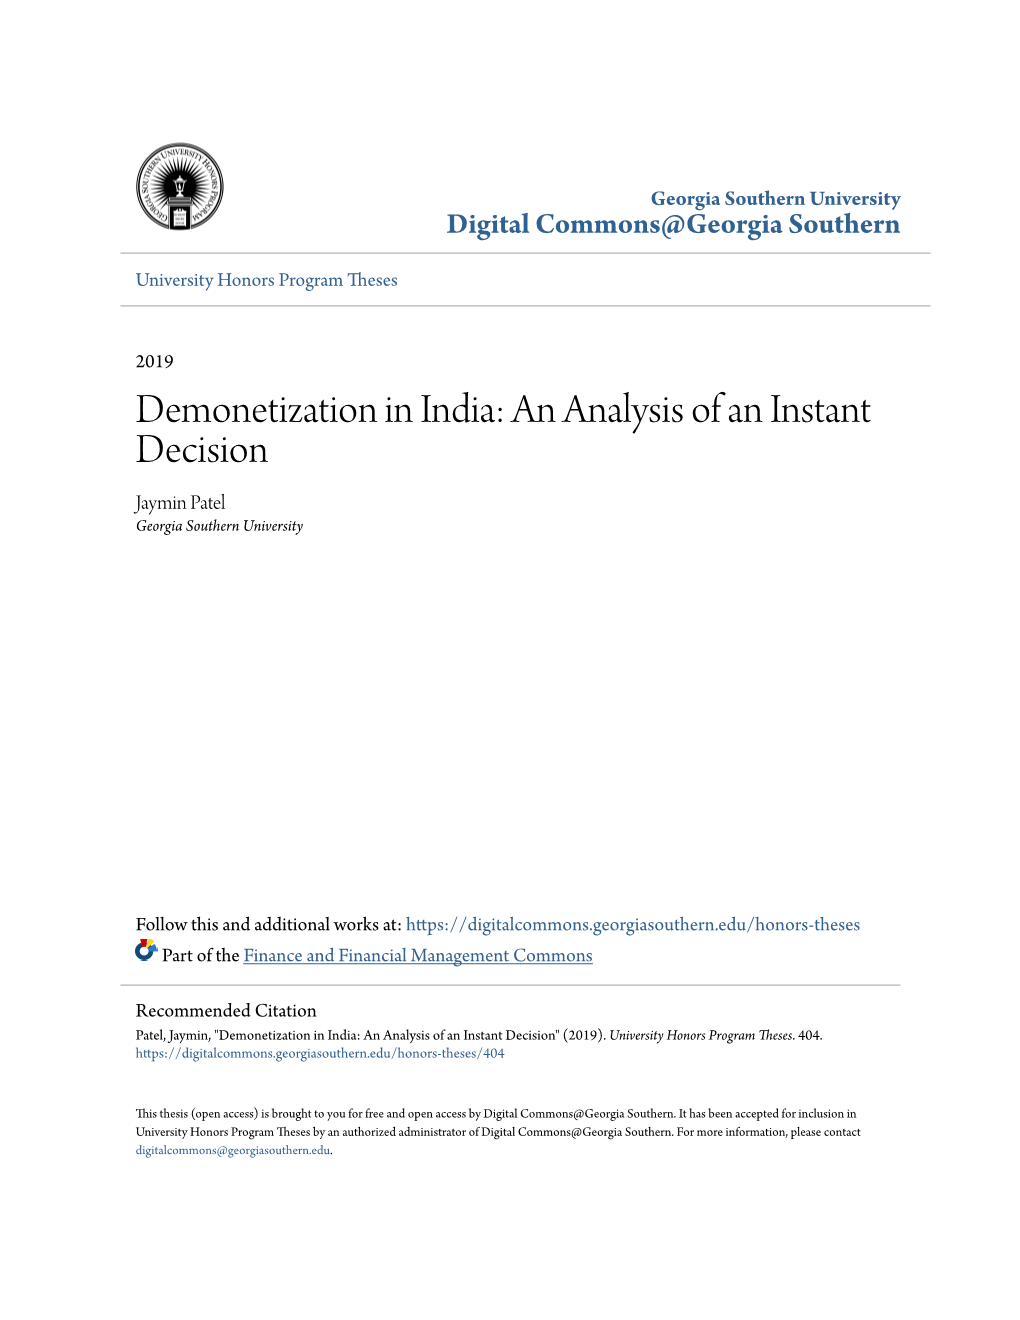 Demonetization in India: an Analysis of an Instant Decision Jaymin Patel Georgia Southern University